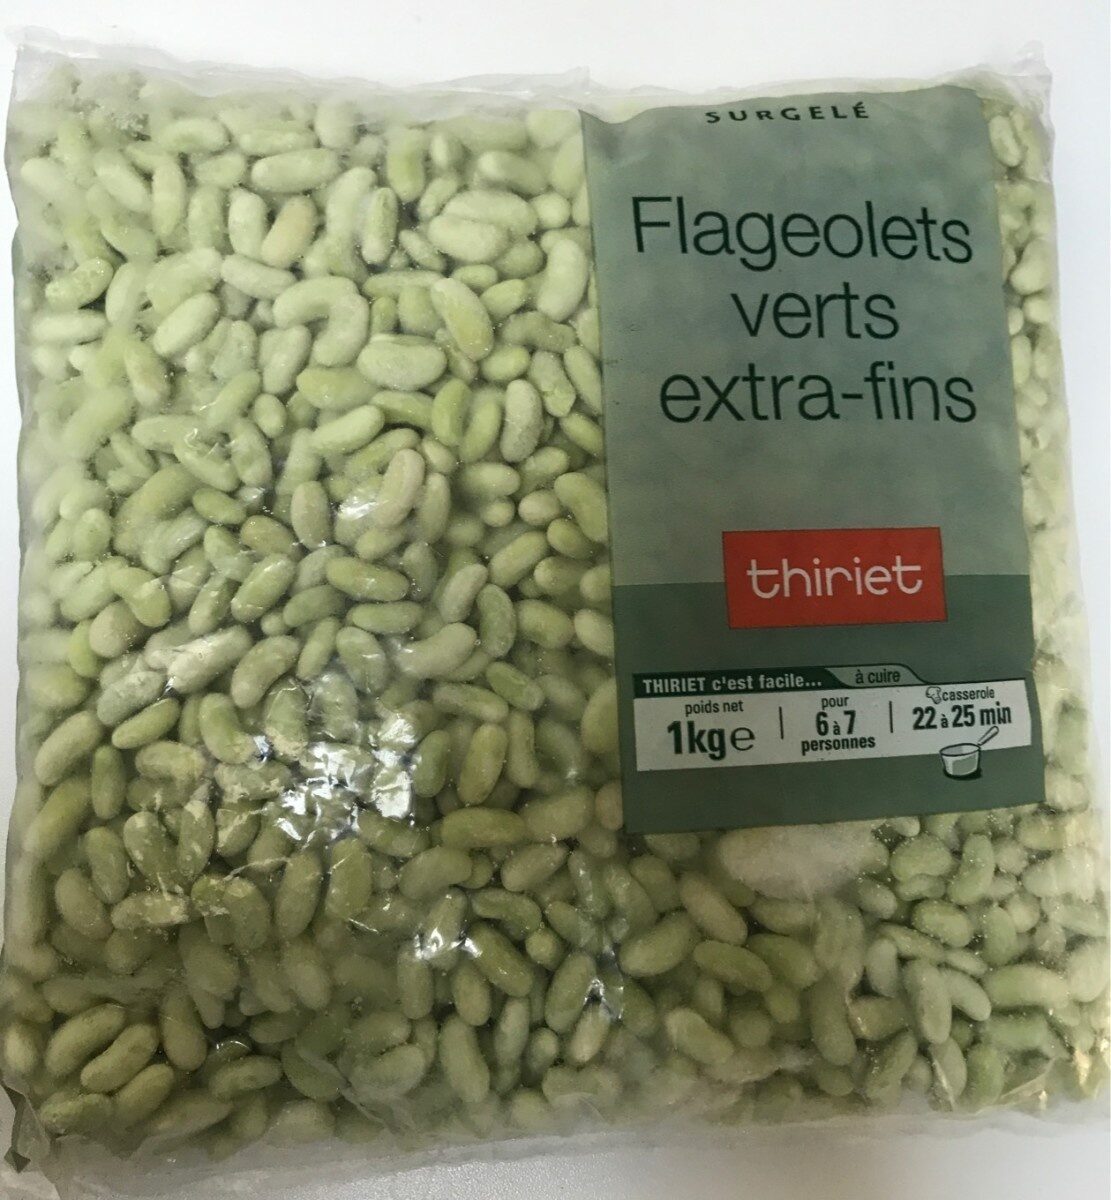 Flageolets verts extra-fins - Product - fr